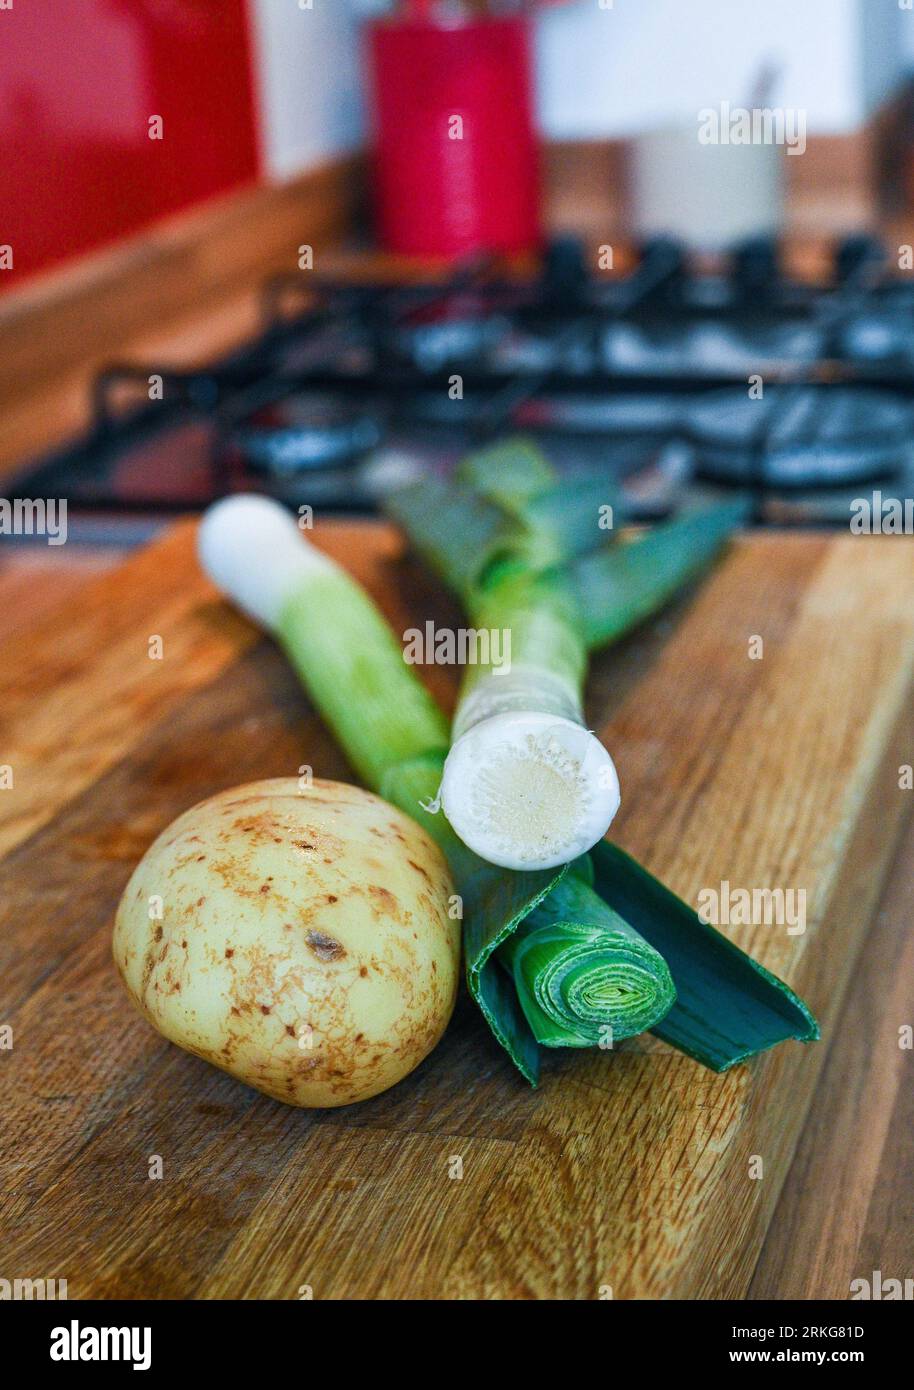 One large potato and two leeks ready for making leek and potato soup Stock Photo